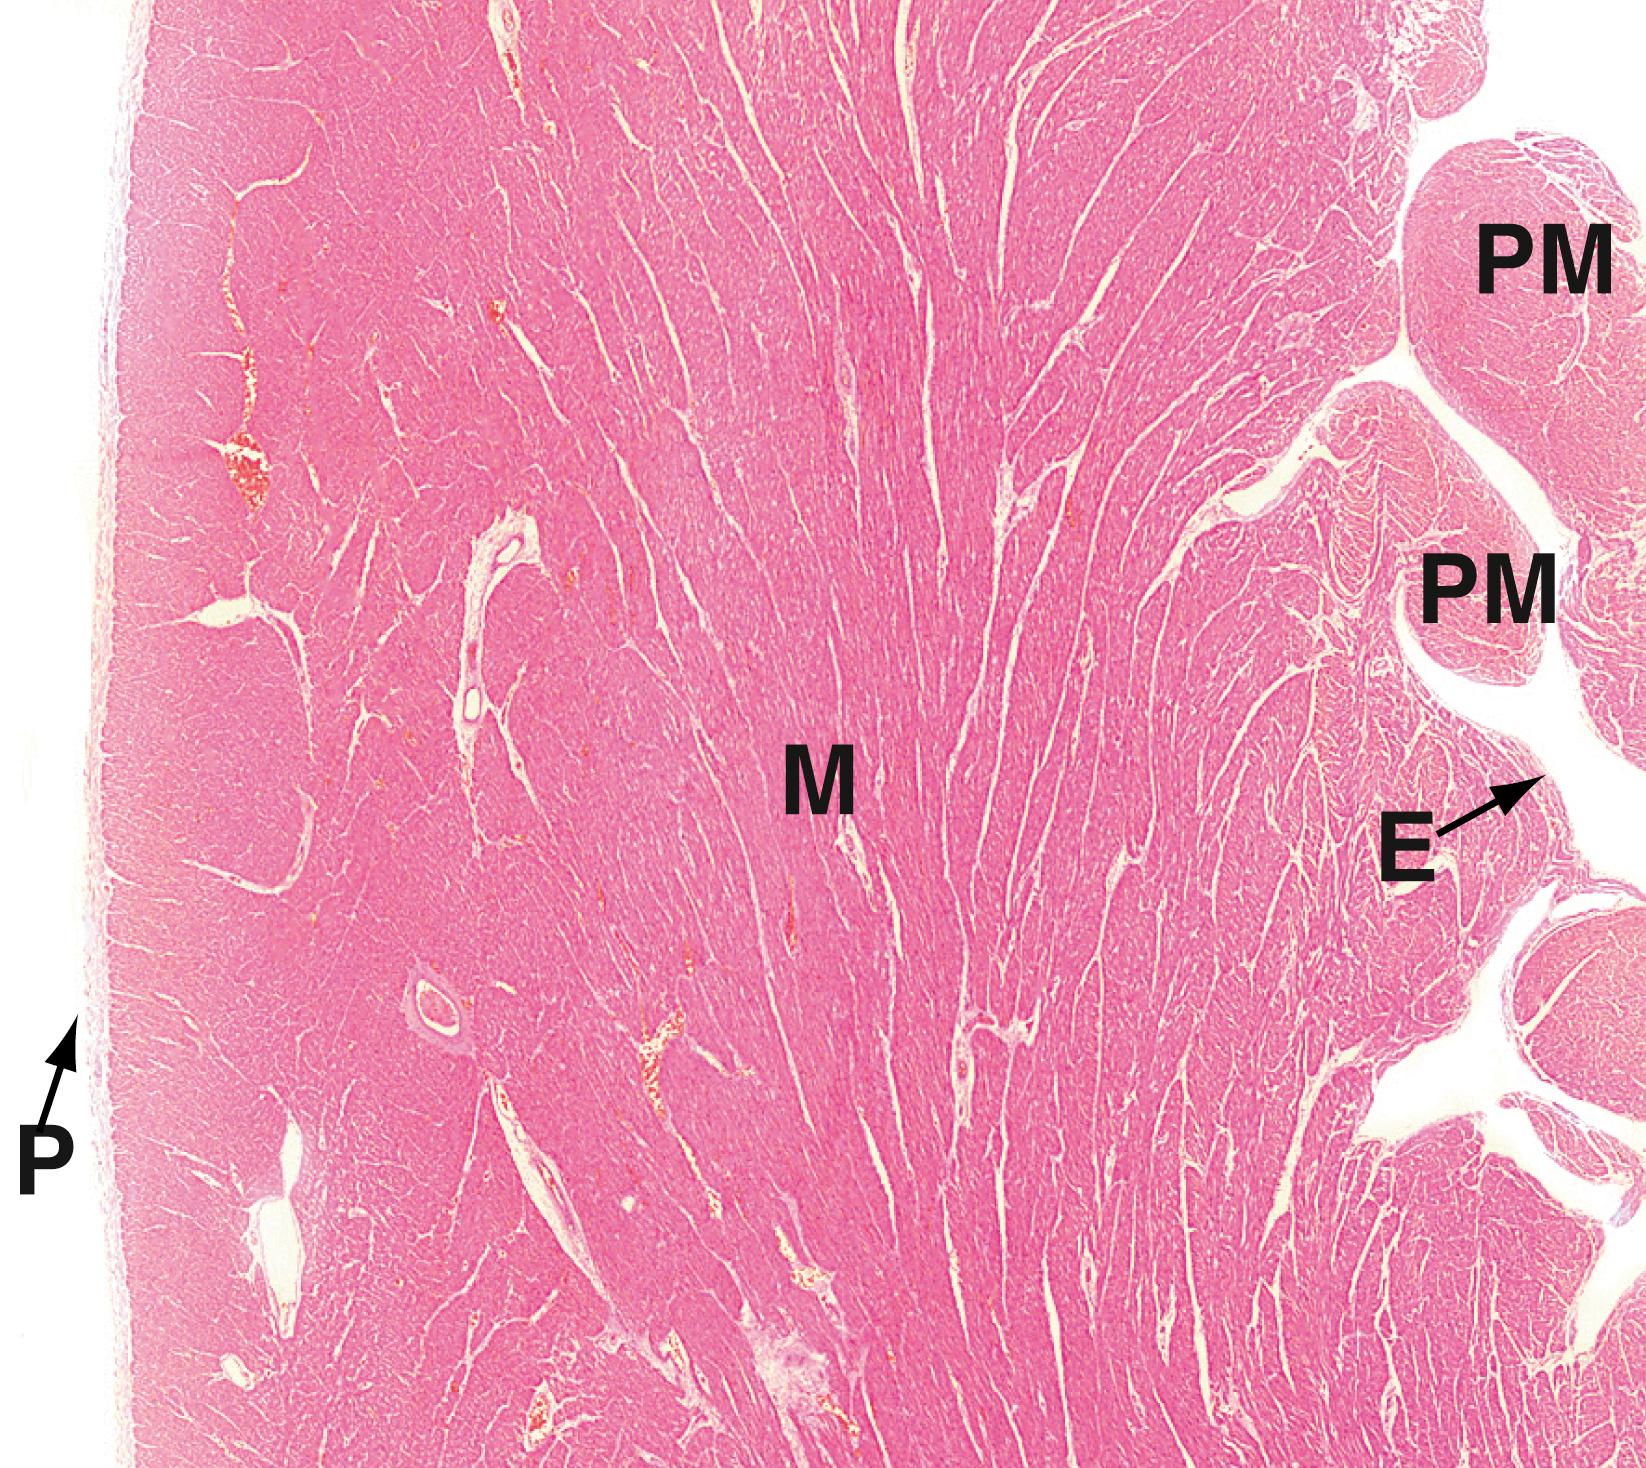 E-Fig. 11.5 H, Heart: left ventricular wall H&E (LP). This low-power micrograph shows the three basic layers of the heart wall, in this case the left ventricle . The tunica intima equivalent of the heart is the endocardium E , normally a thin layer in a ventricle. This is lined by a single layer of flattened endothelial cells, as is the case elsewhere in the circulatory system. The tunica media equivalent is the myocardium M , made up of cardiac-type muscle. In the left ventricle, this layer is very prominent due to its role in pumping oxygenated blood throughout the systemic circulation, but it is less thick in the right ventricle and in the atria which operate at much lower pressures. Note the origins of the papillary muscles PM , extensions of the myocardium which protrude into the left ventricular cavity and provide attachment points of the chordae tendinae which tether the cusps of the atrio-ventricular valves. The equivalent of the tunica adventitia is the epicardium or visceral pericardium P , usually a thin layer (as here) but, in some areas, containing adipose tissue. The coronary arteries run within the epicardial fat.